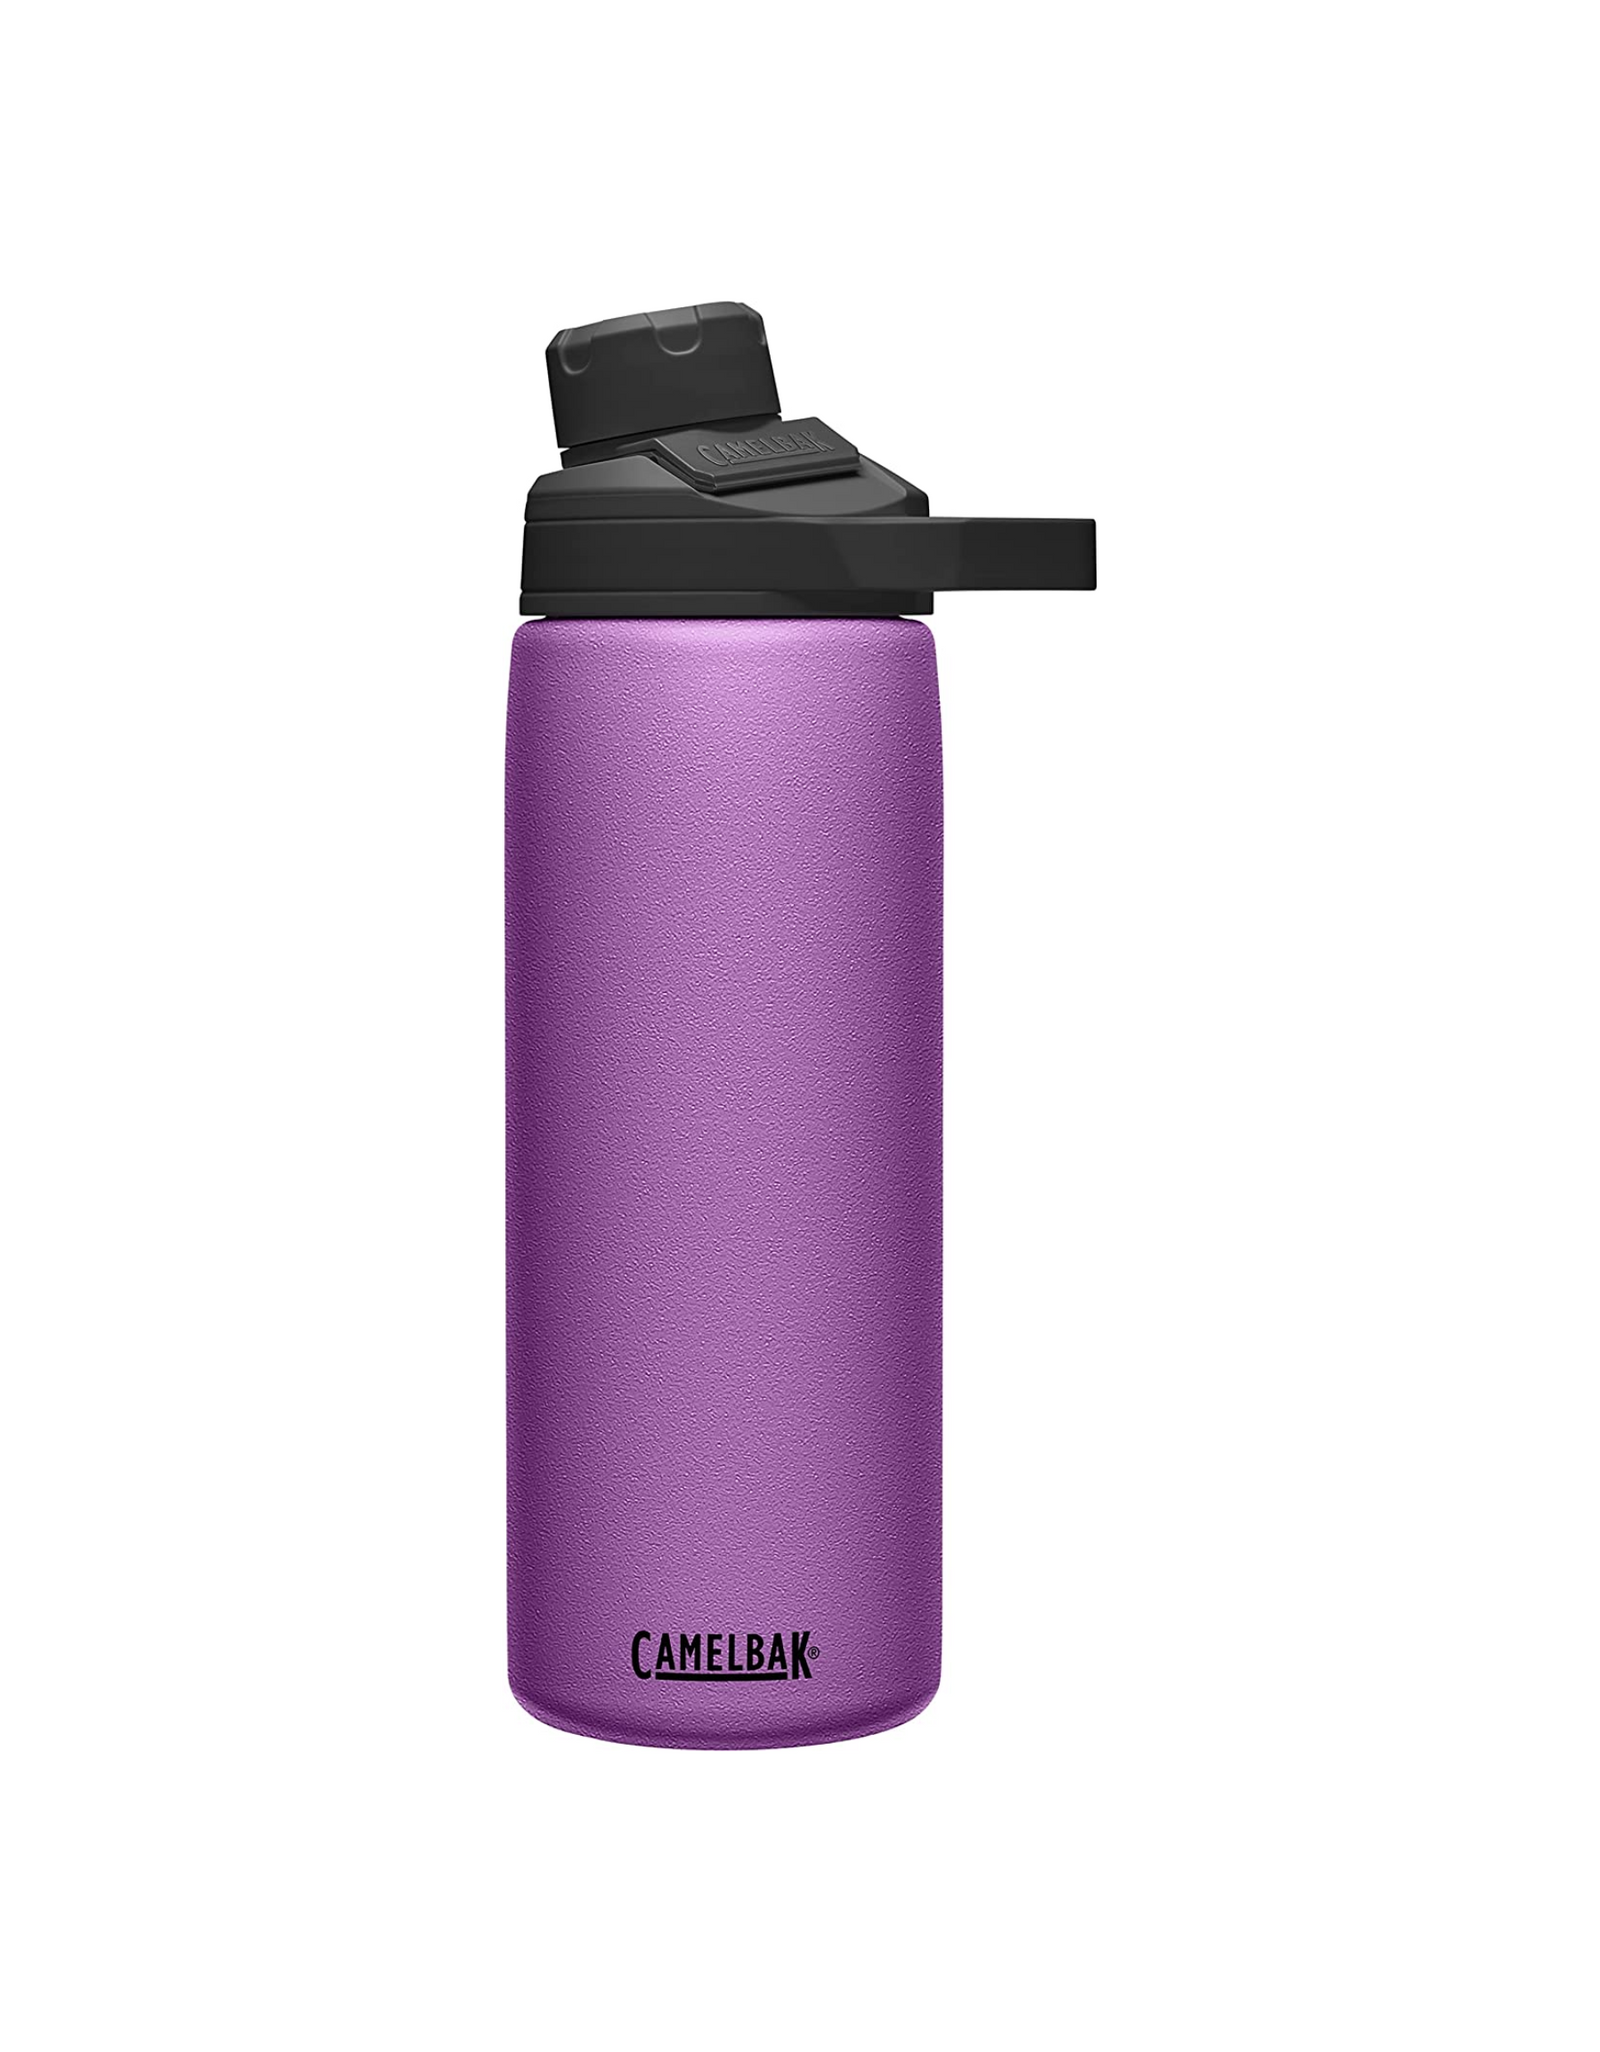 CamelBak Chute Mag Water Bottle, Insulated Stainless Steel, 20 oz, Magenta